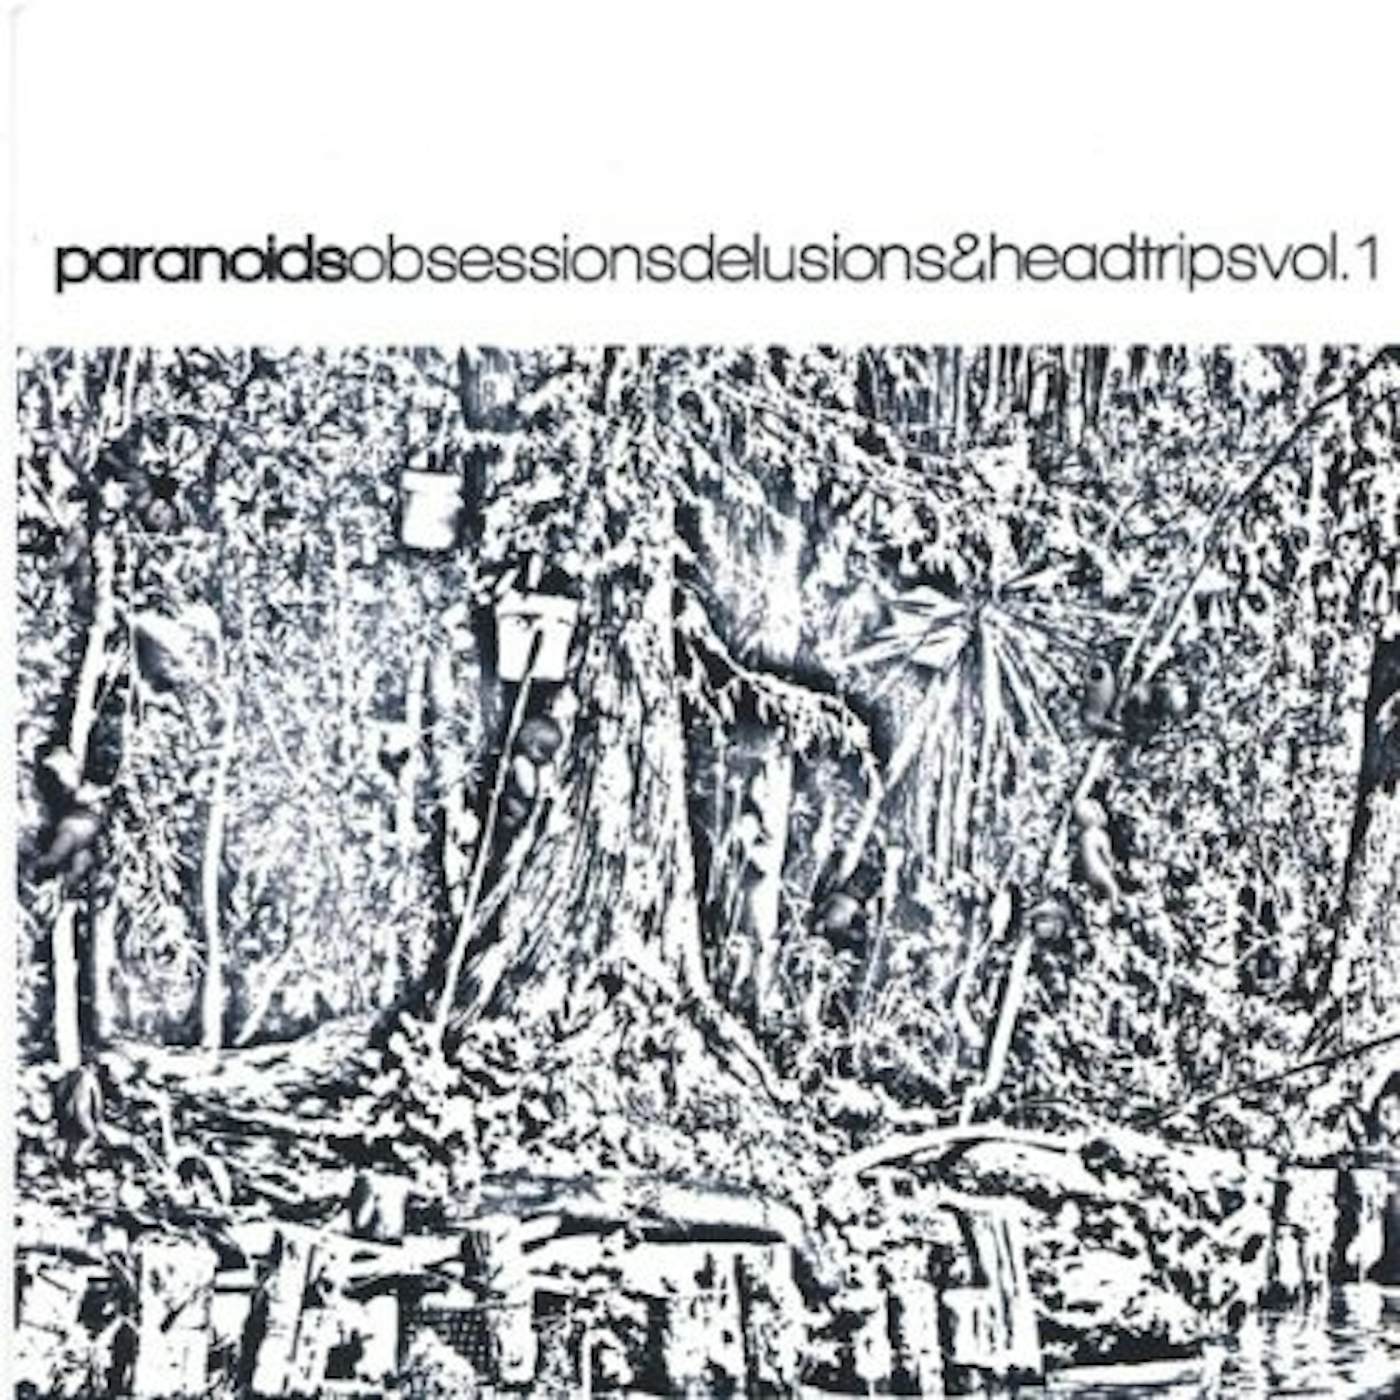 Paranoids OBSESSIONS DELUSIONS & HEADTRIPS 1 CD